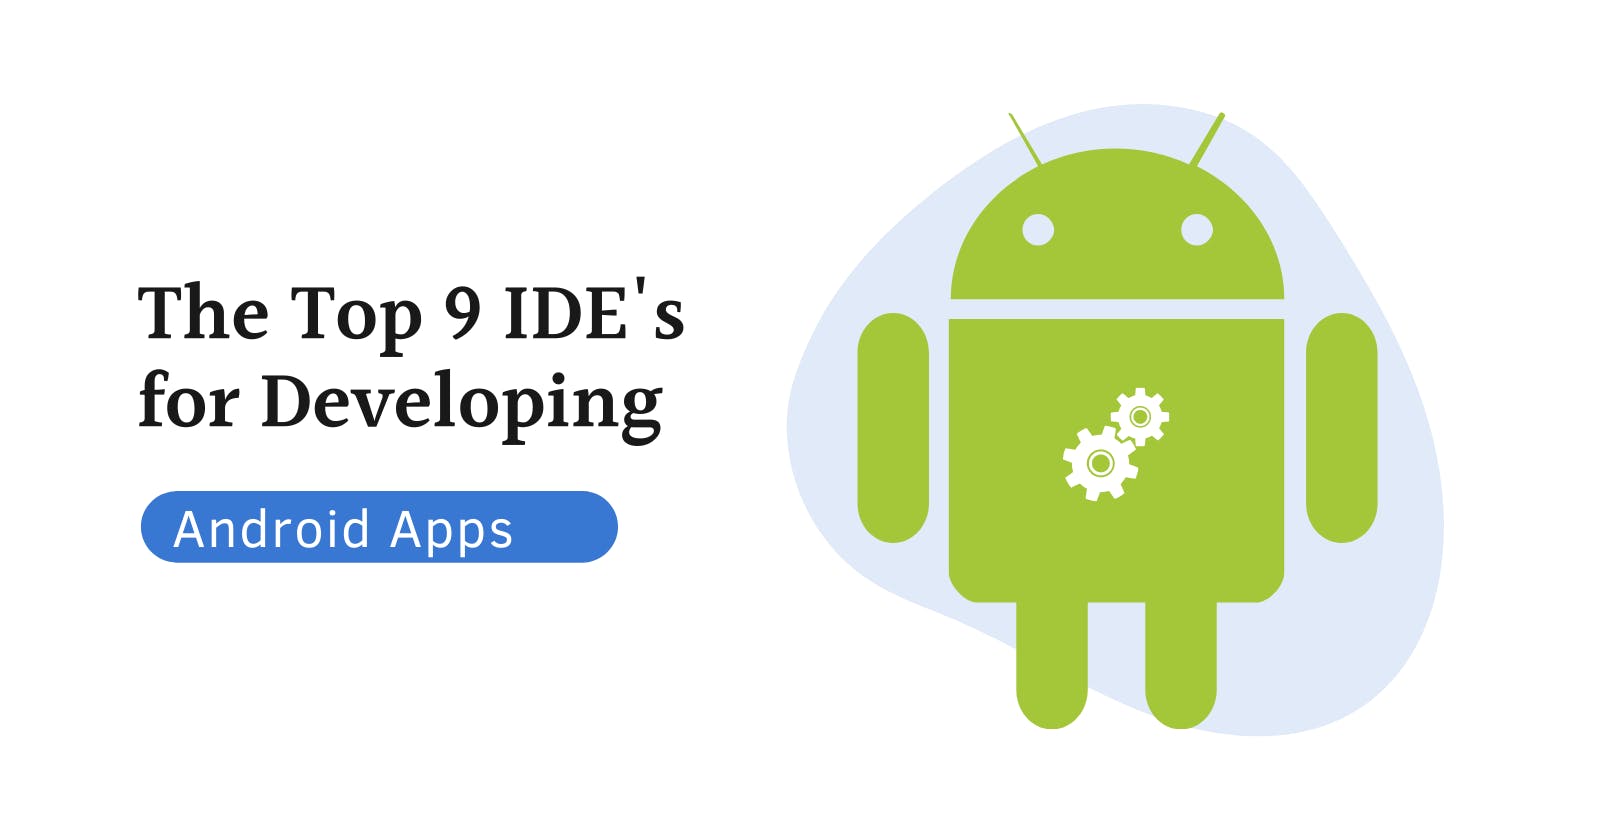 The Top 9 IDE’s for Developing Android Apps